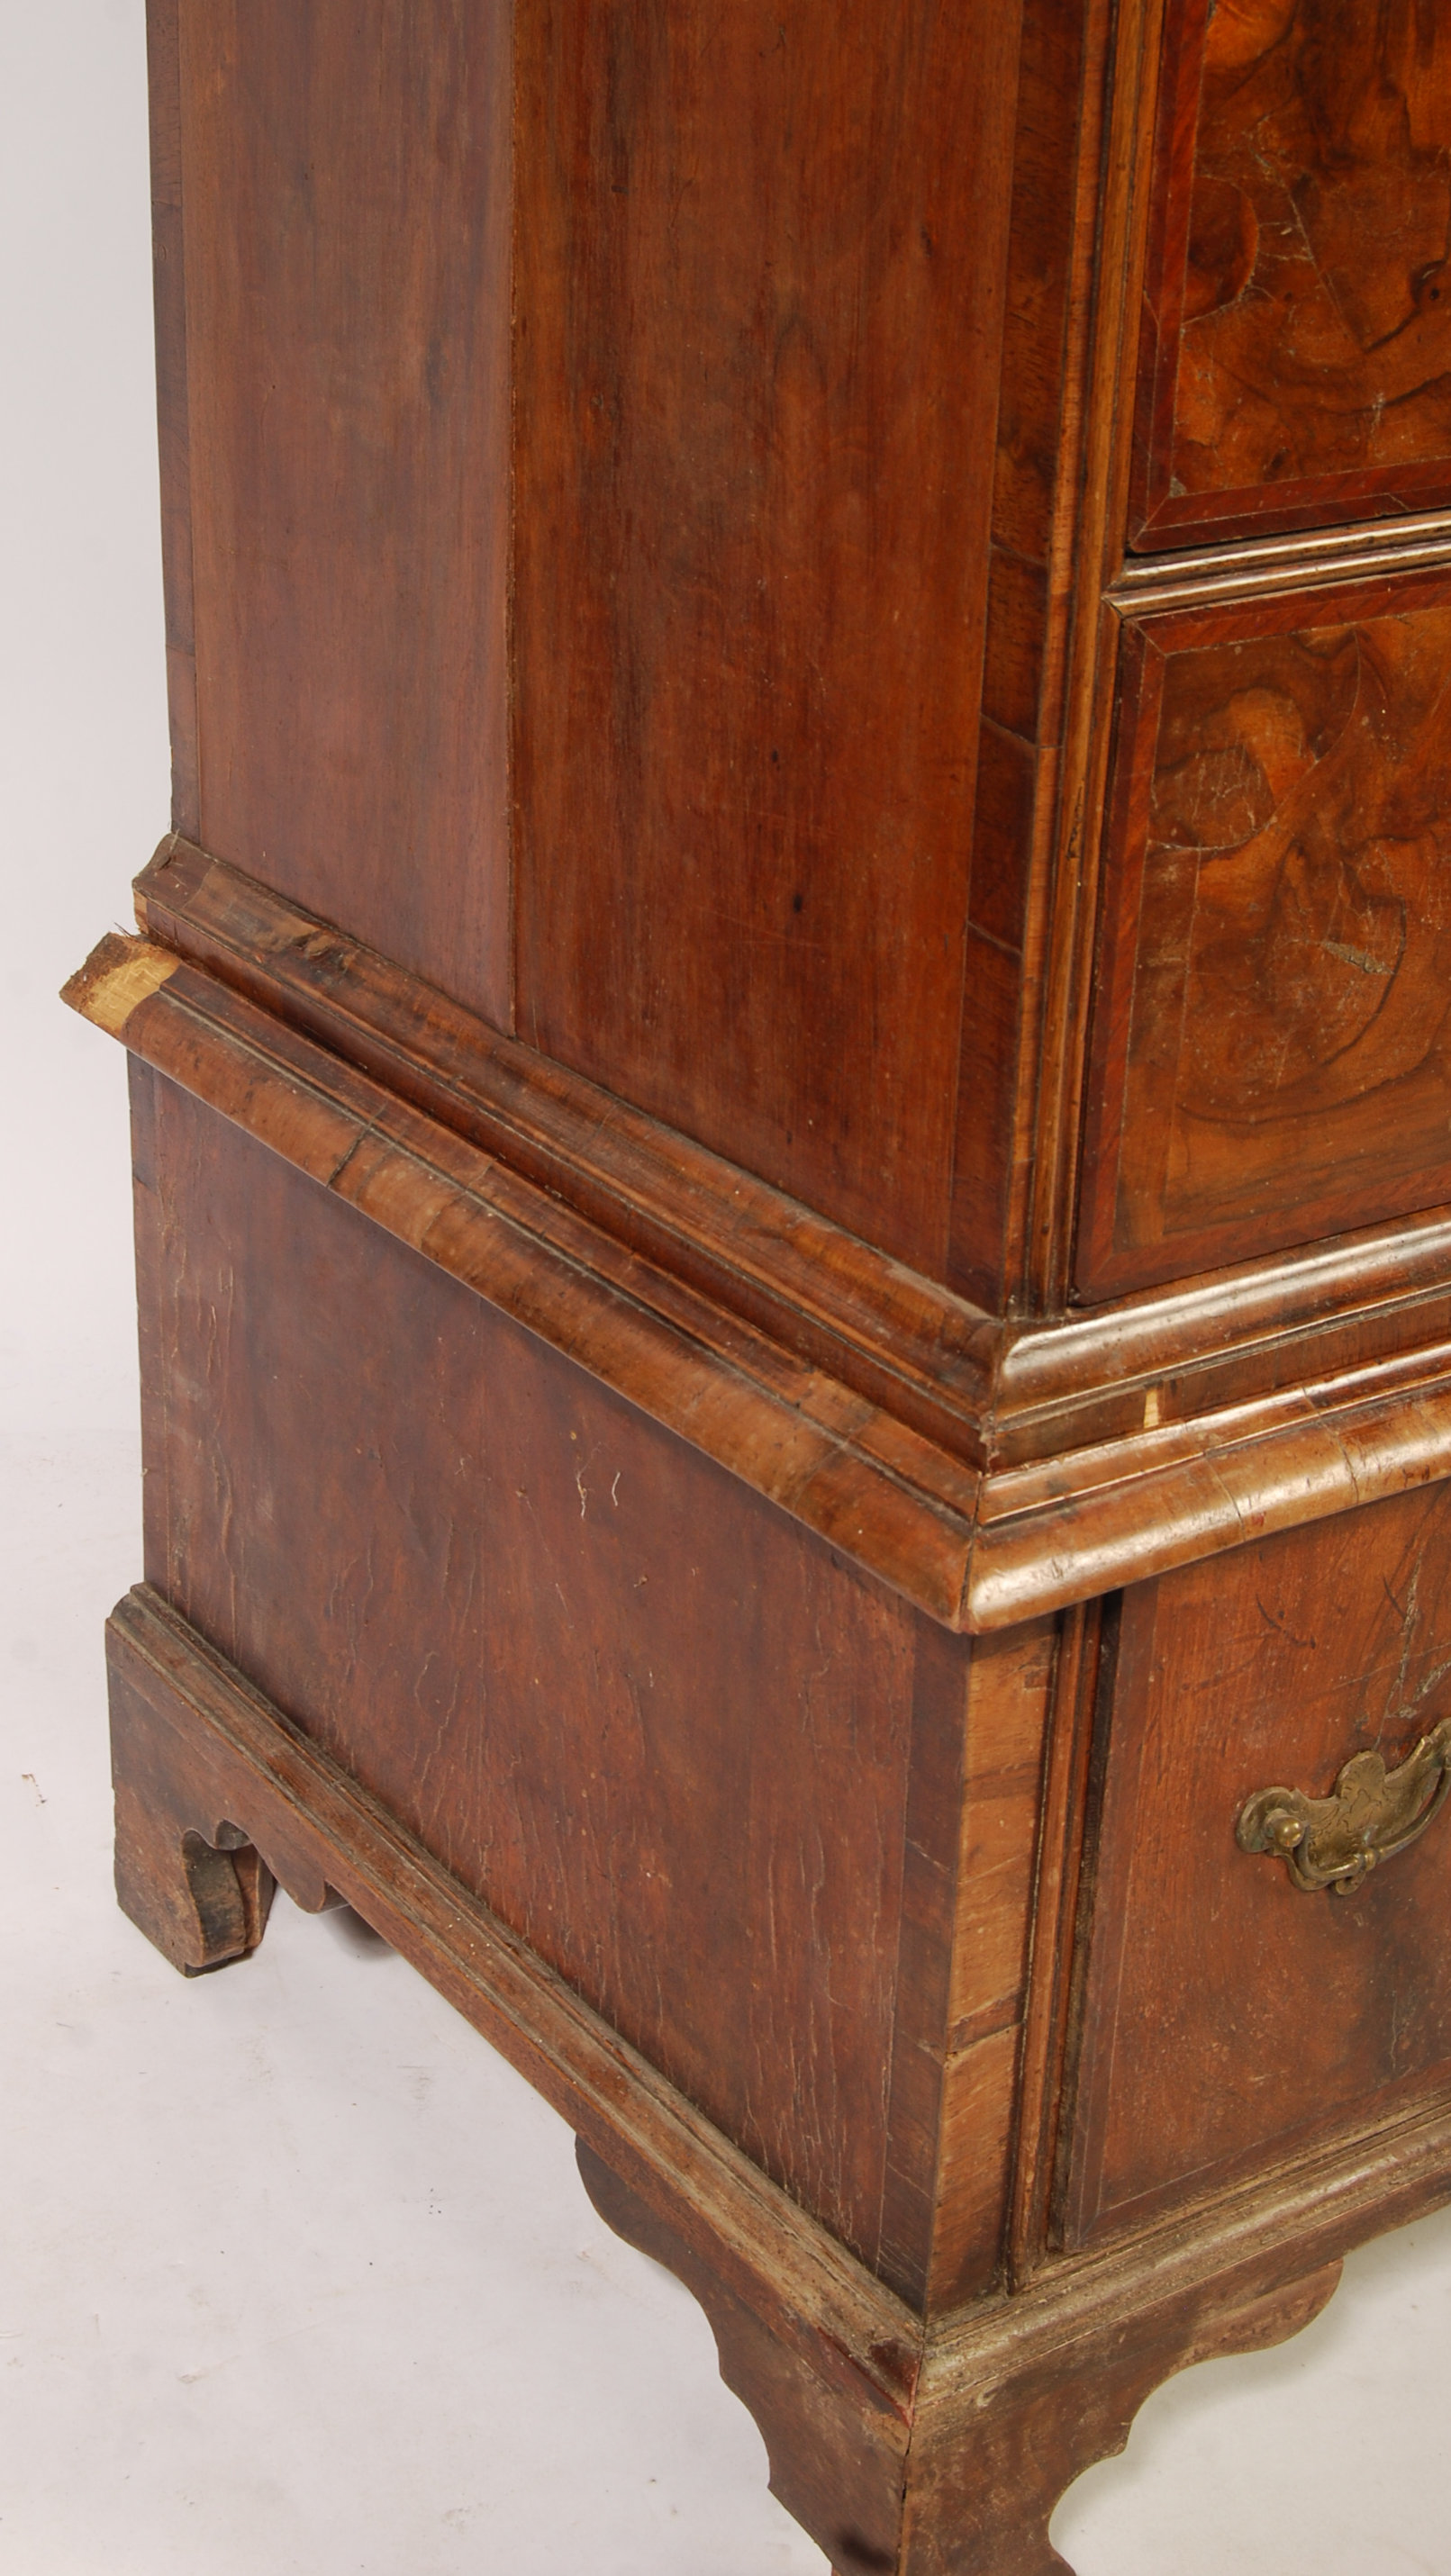 LATE 17TH / 18TH CENTURY WALNUT CHEST ON STAND - Image 4 of 11